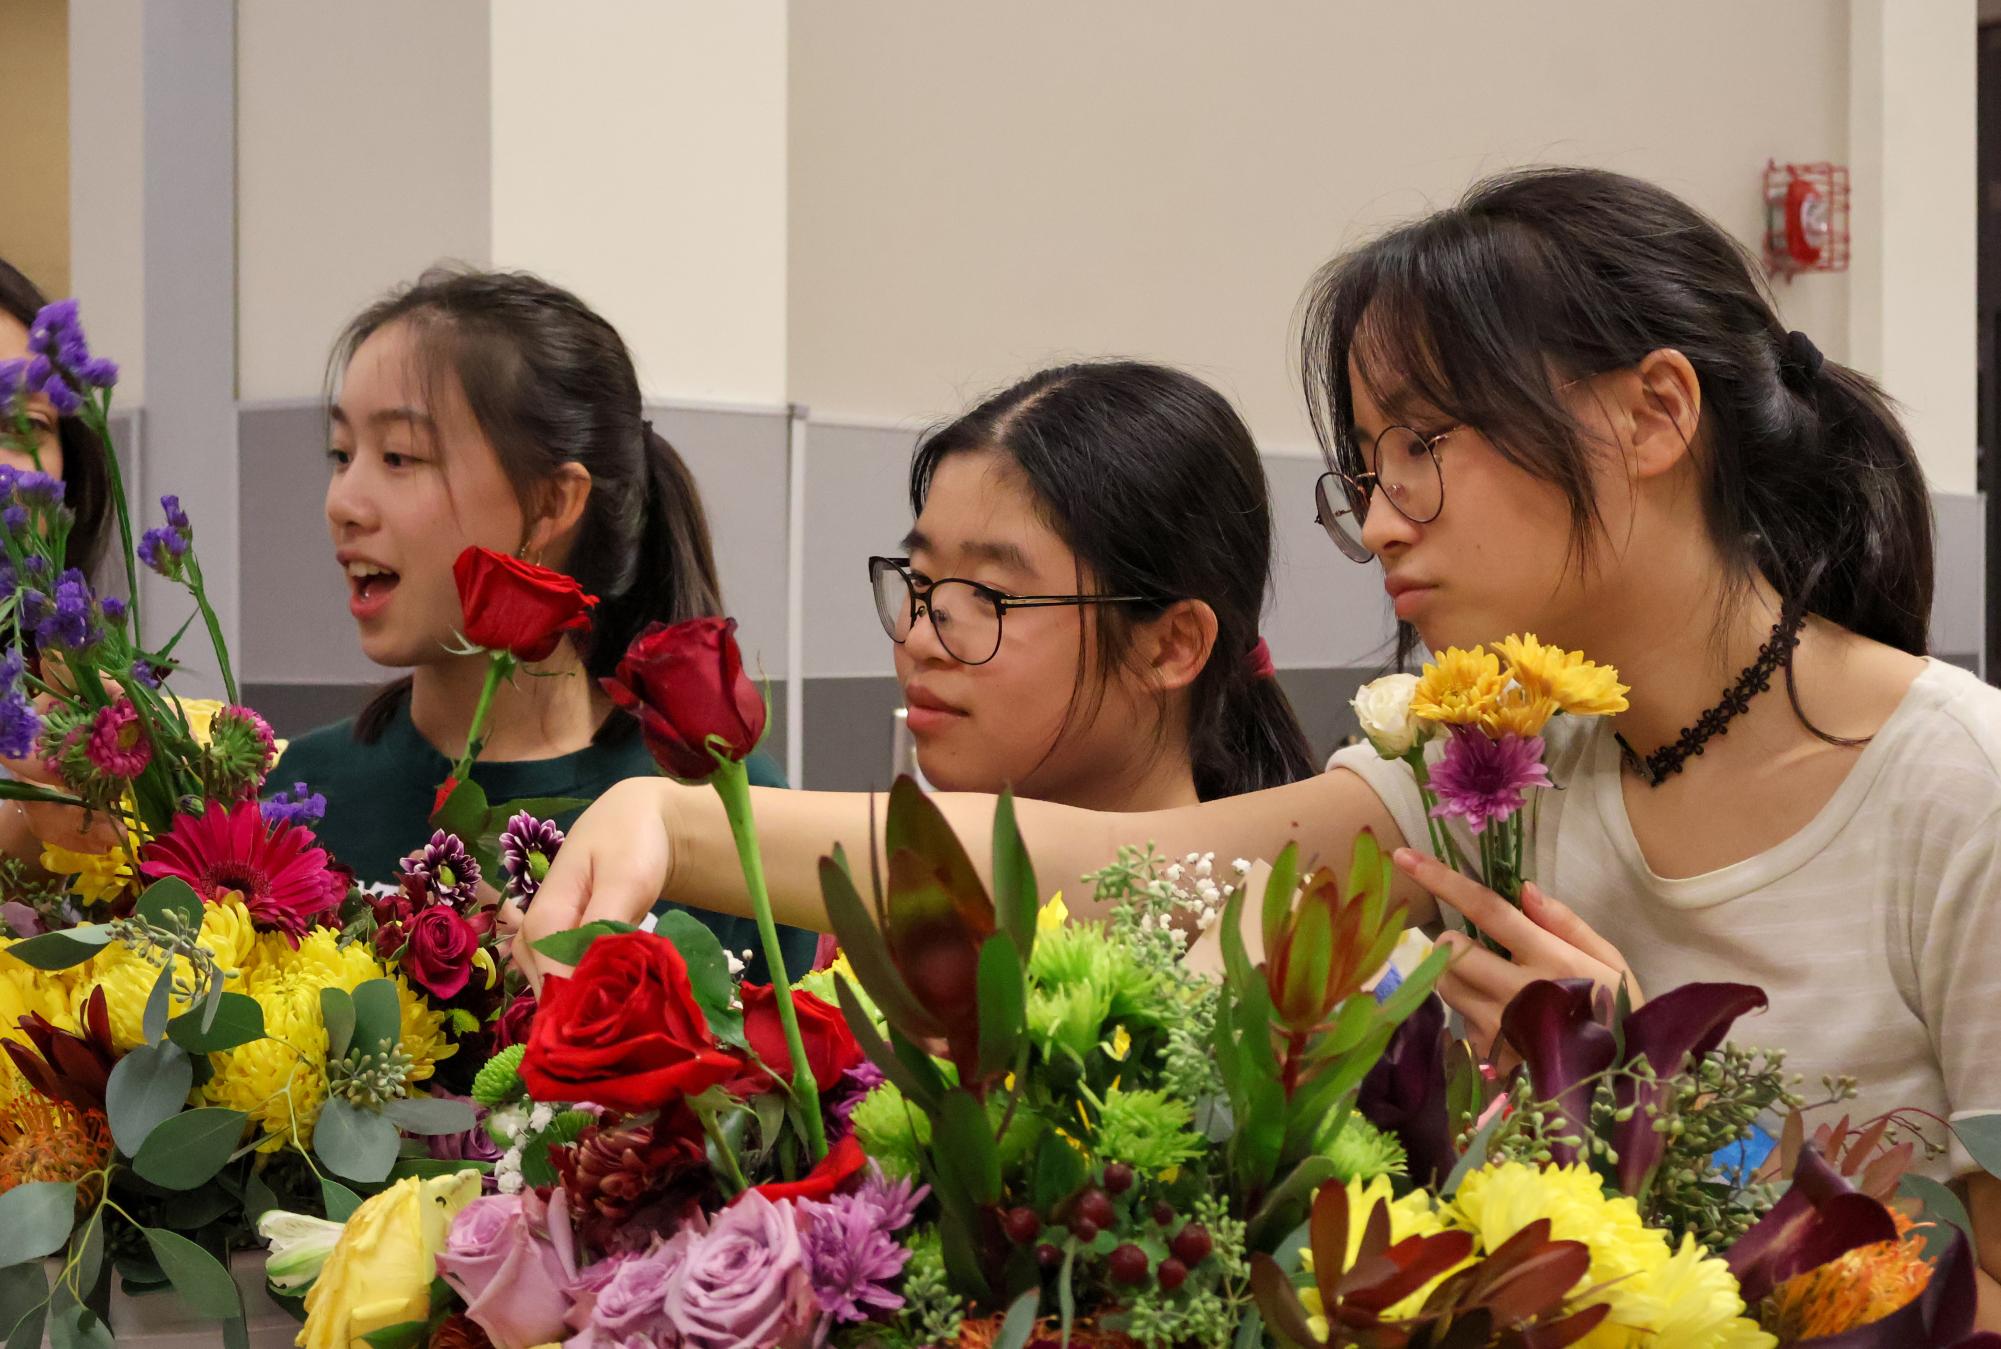 Gathering flowers, sophomores Karen Chen, Iris Chen, and Avery Chen make bouquet arrangements to take home. The flowers were brought to Grateful Gathering by a parent volunteer, and bouquet-making was the last activity of the event.